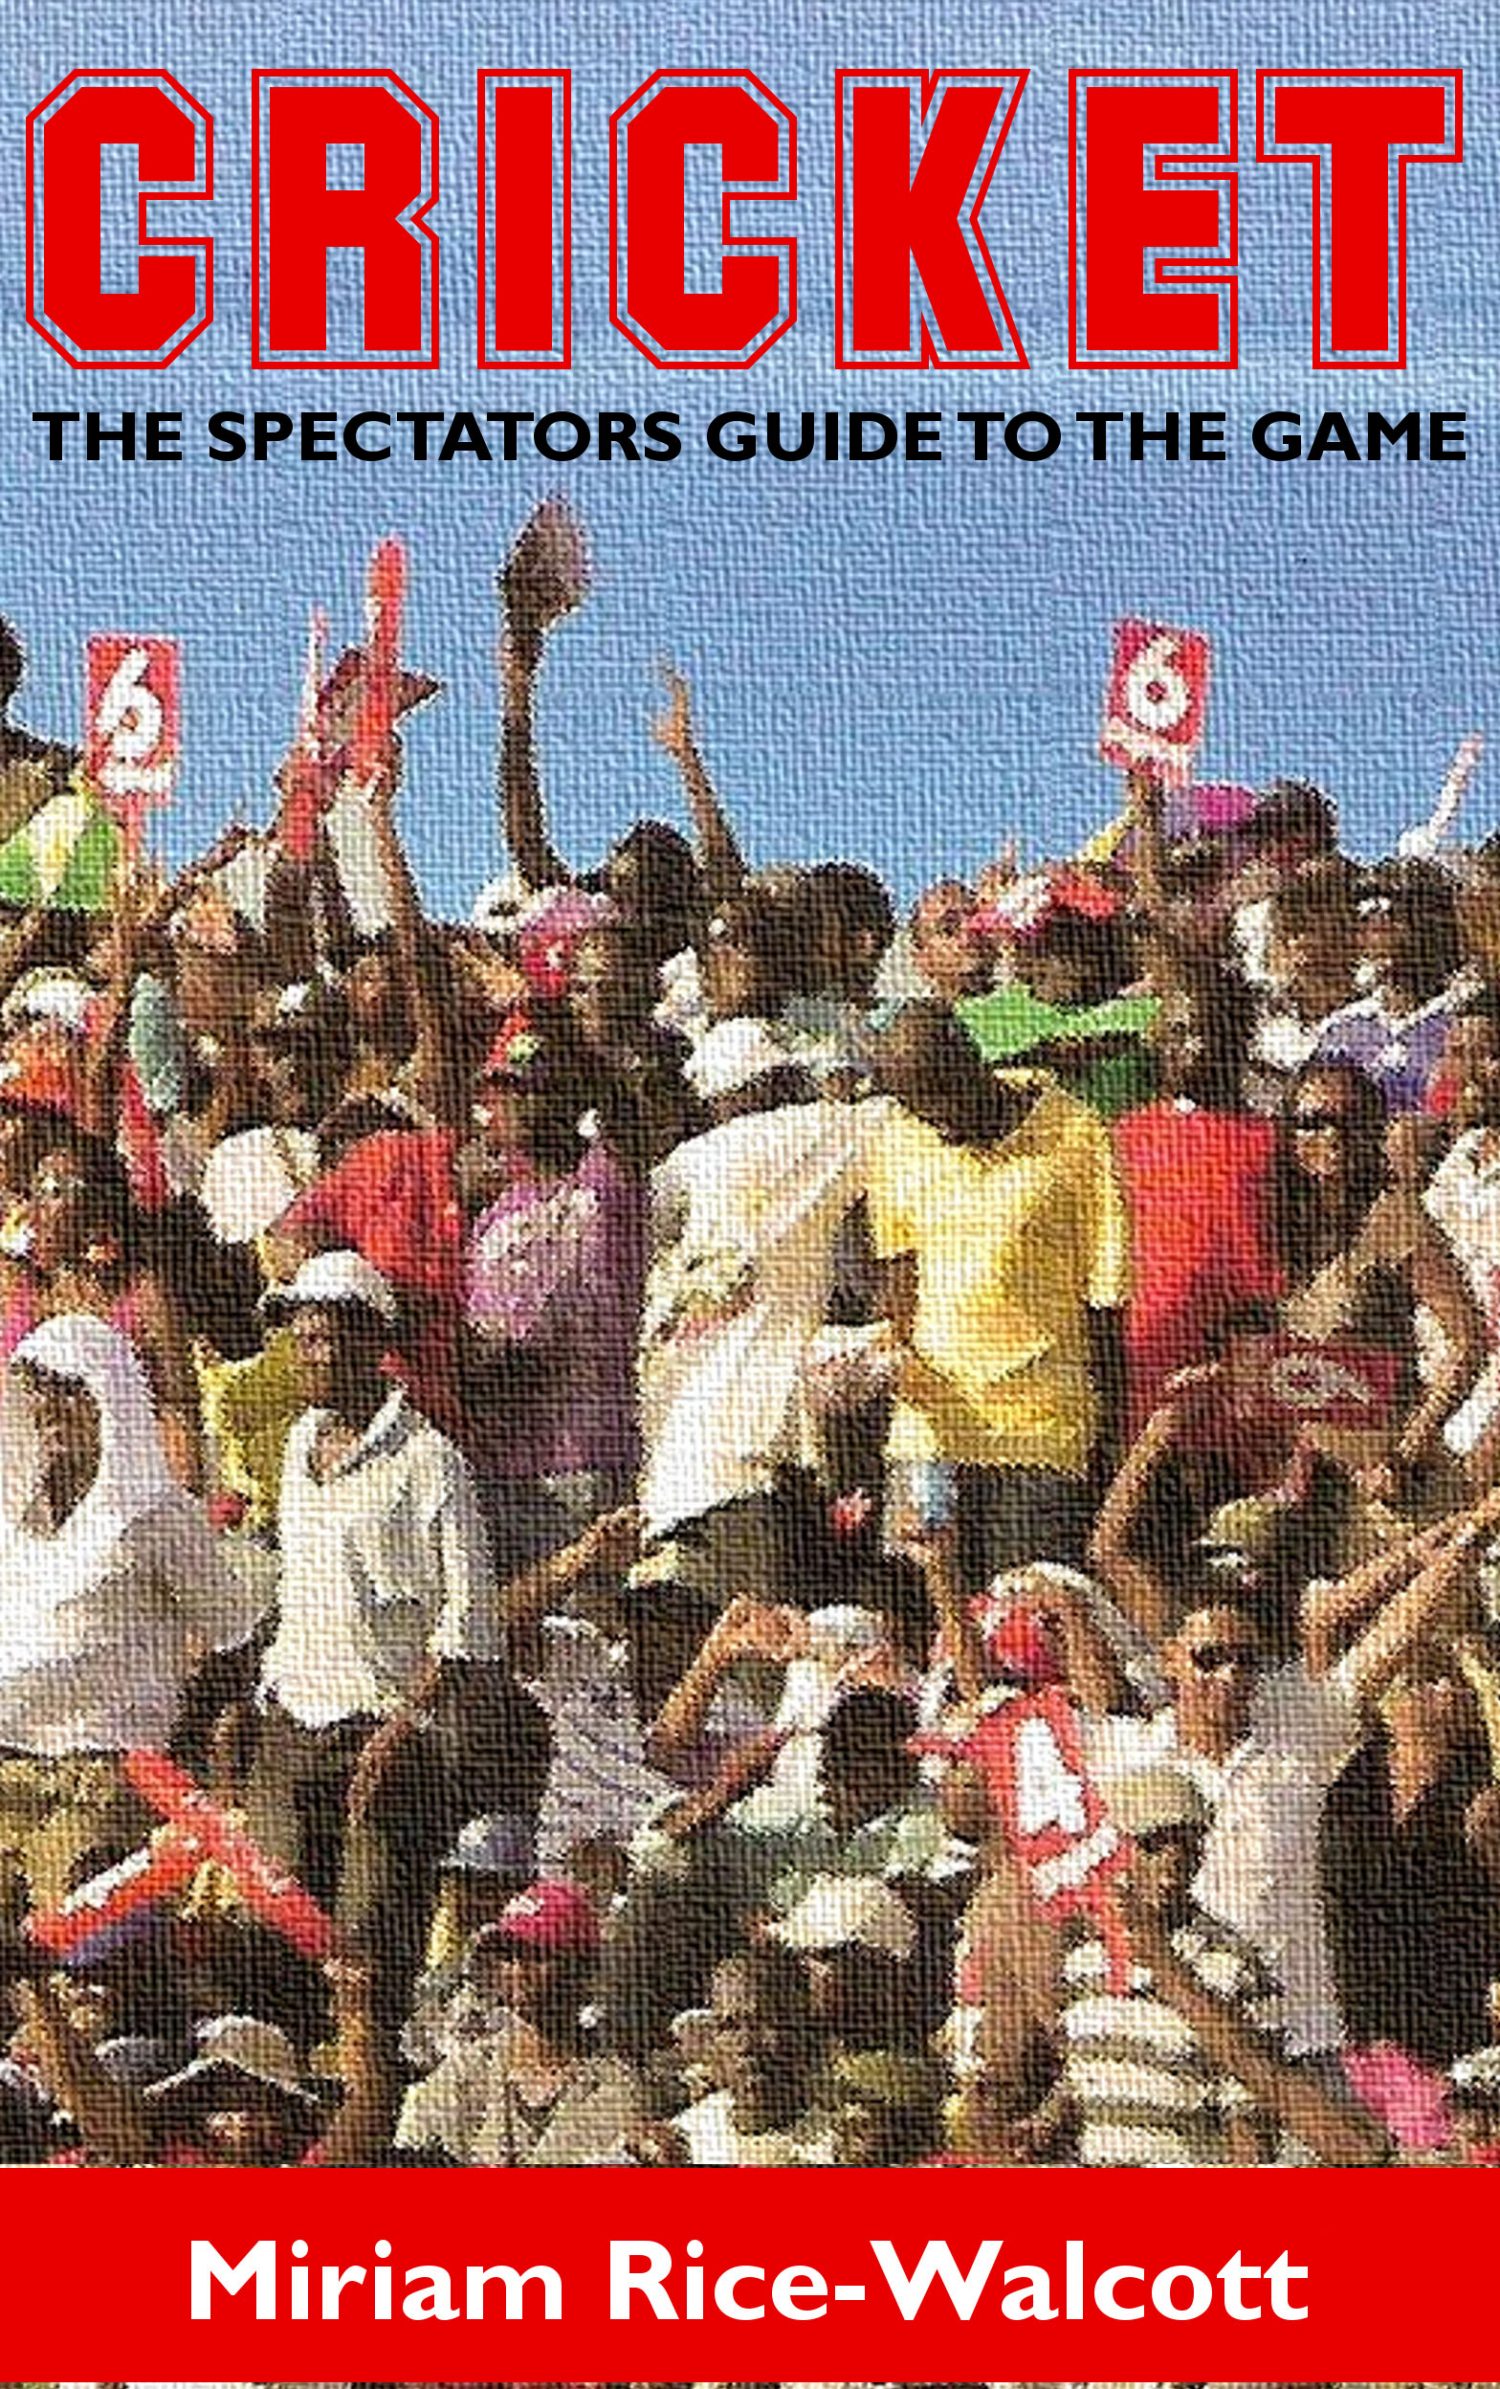 Cover Image of Cricket – The Spectators Guide to the Game
